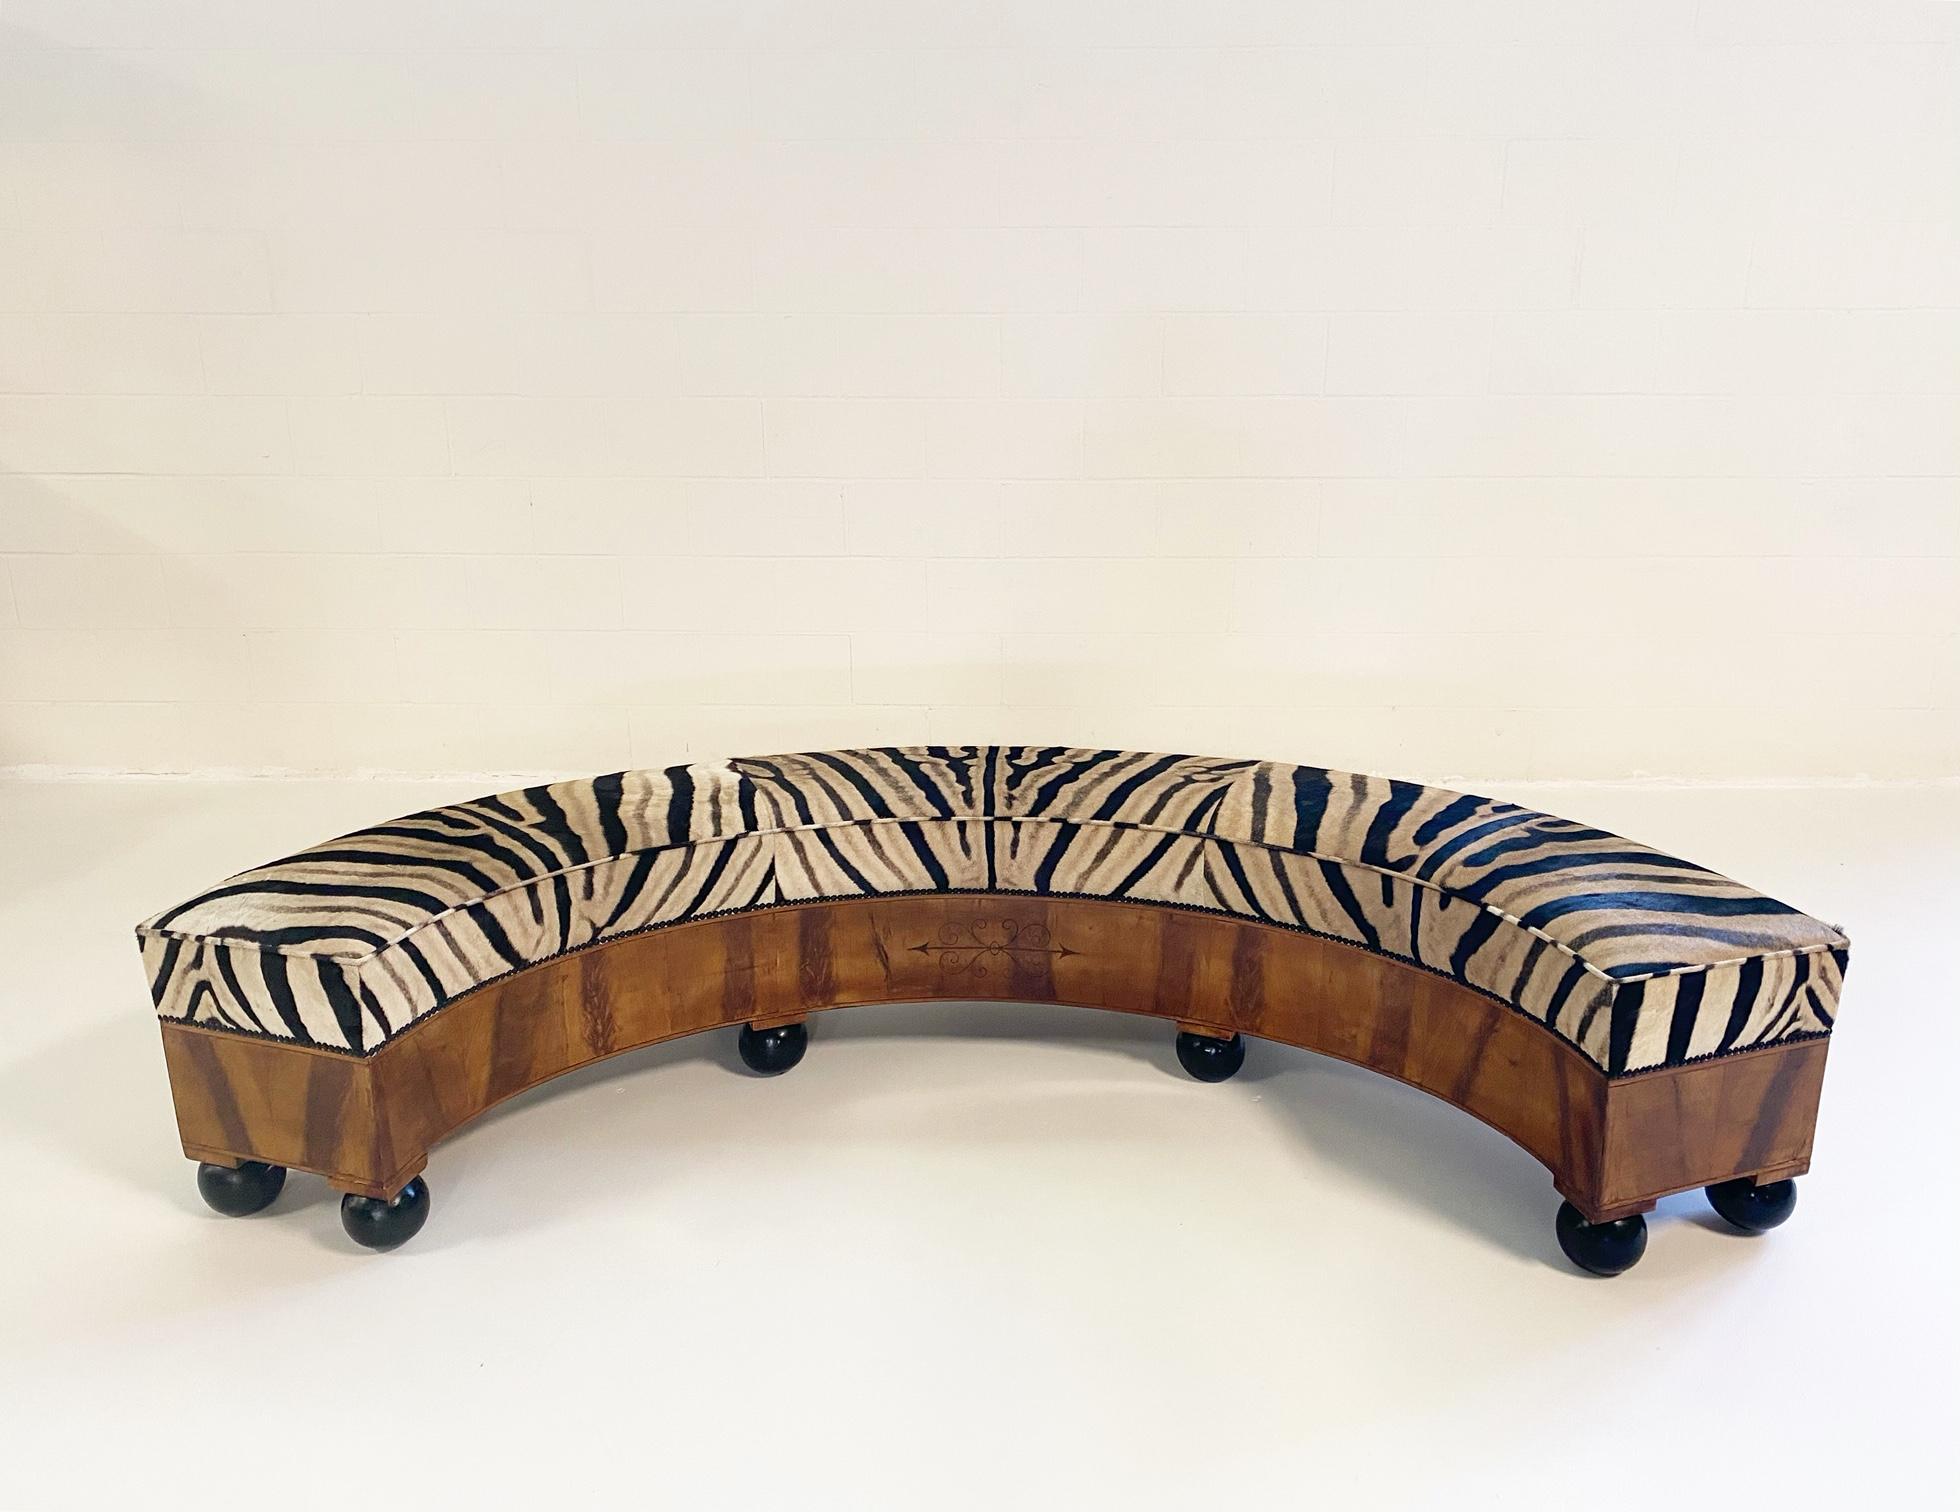 Early 19th Century 19th Century Fruitwood Banquette Restored in Zebra Hide